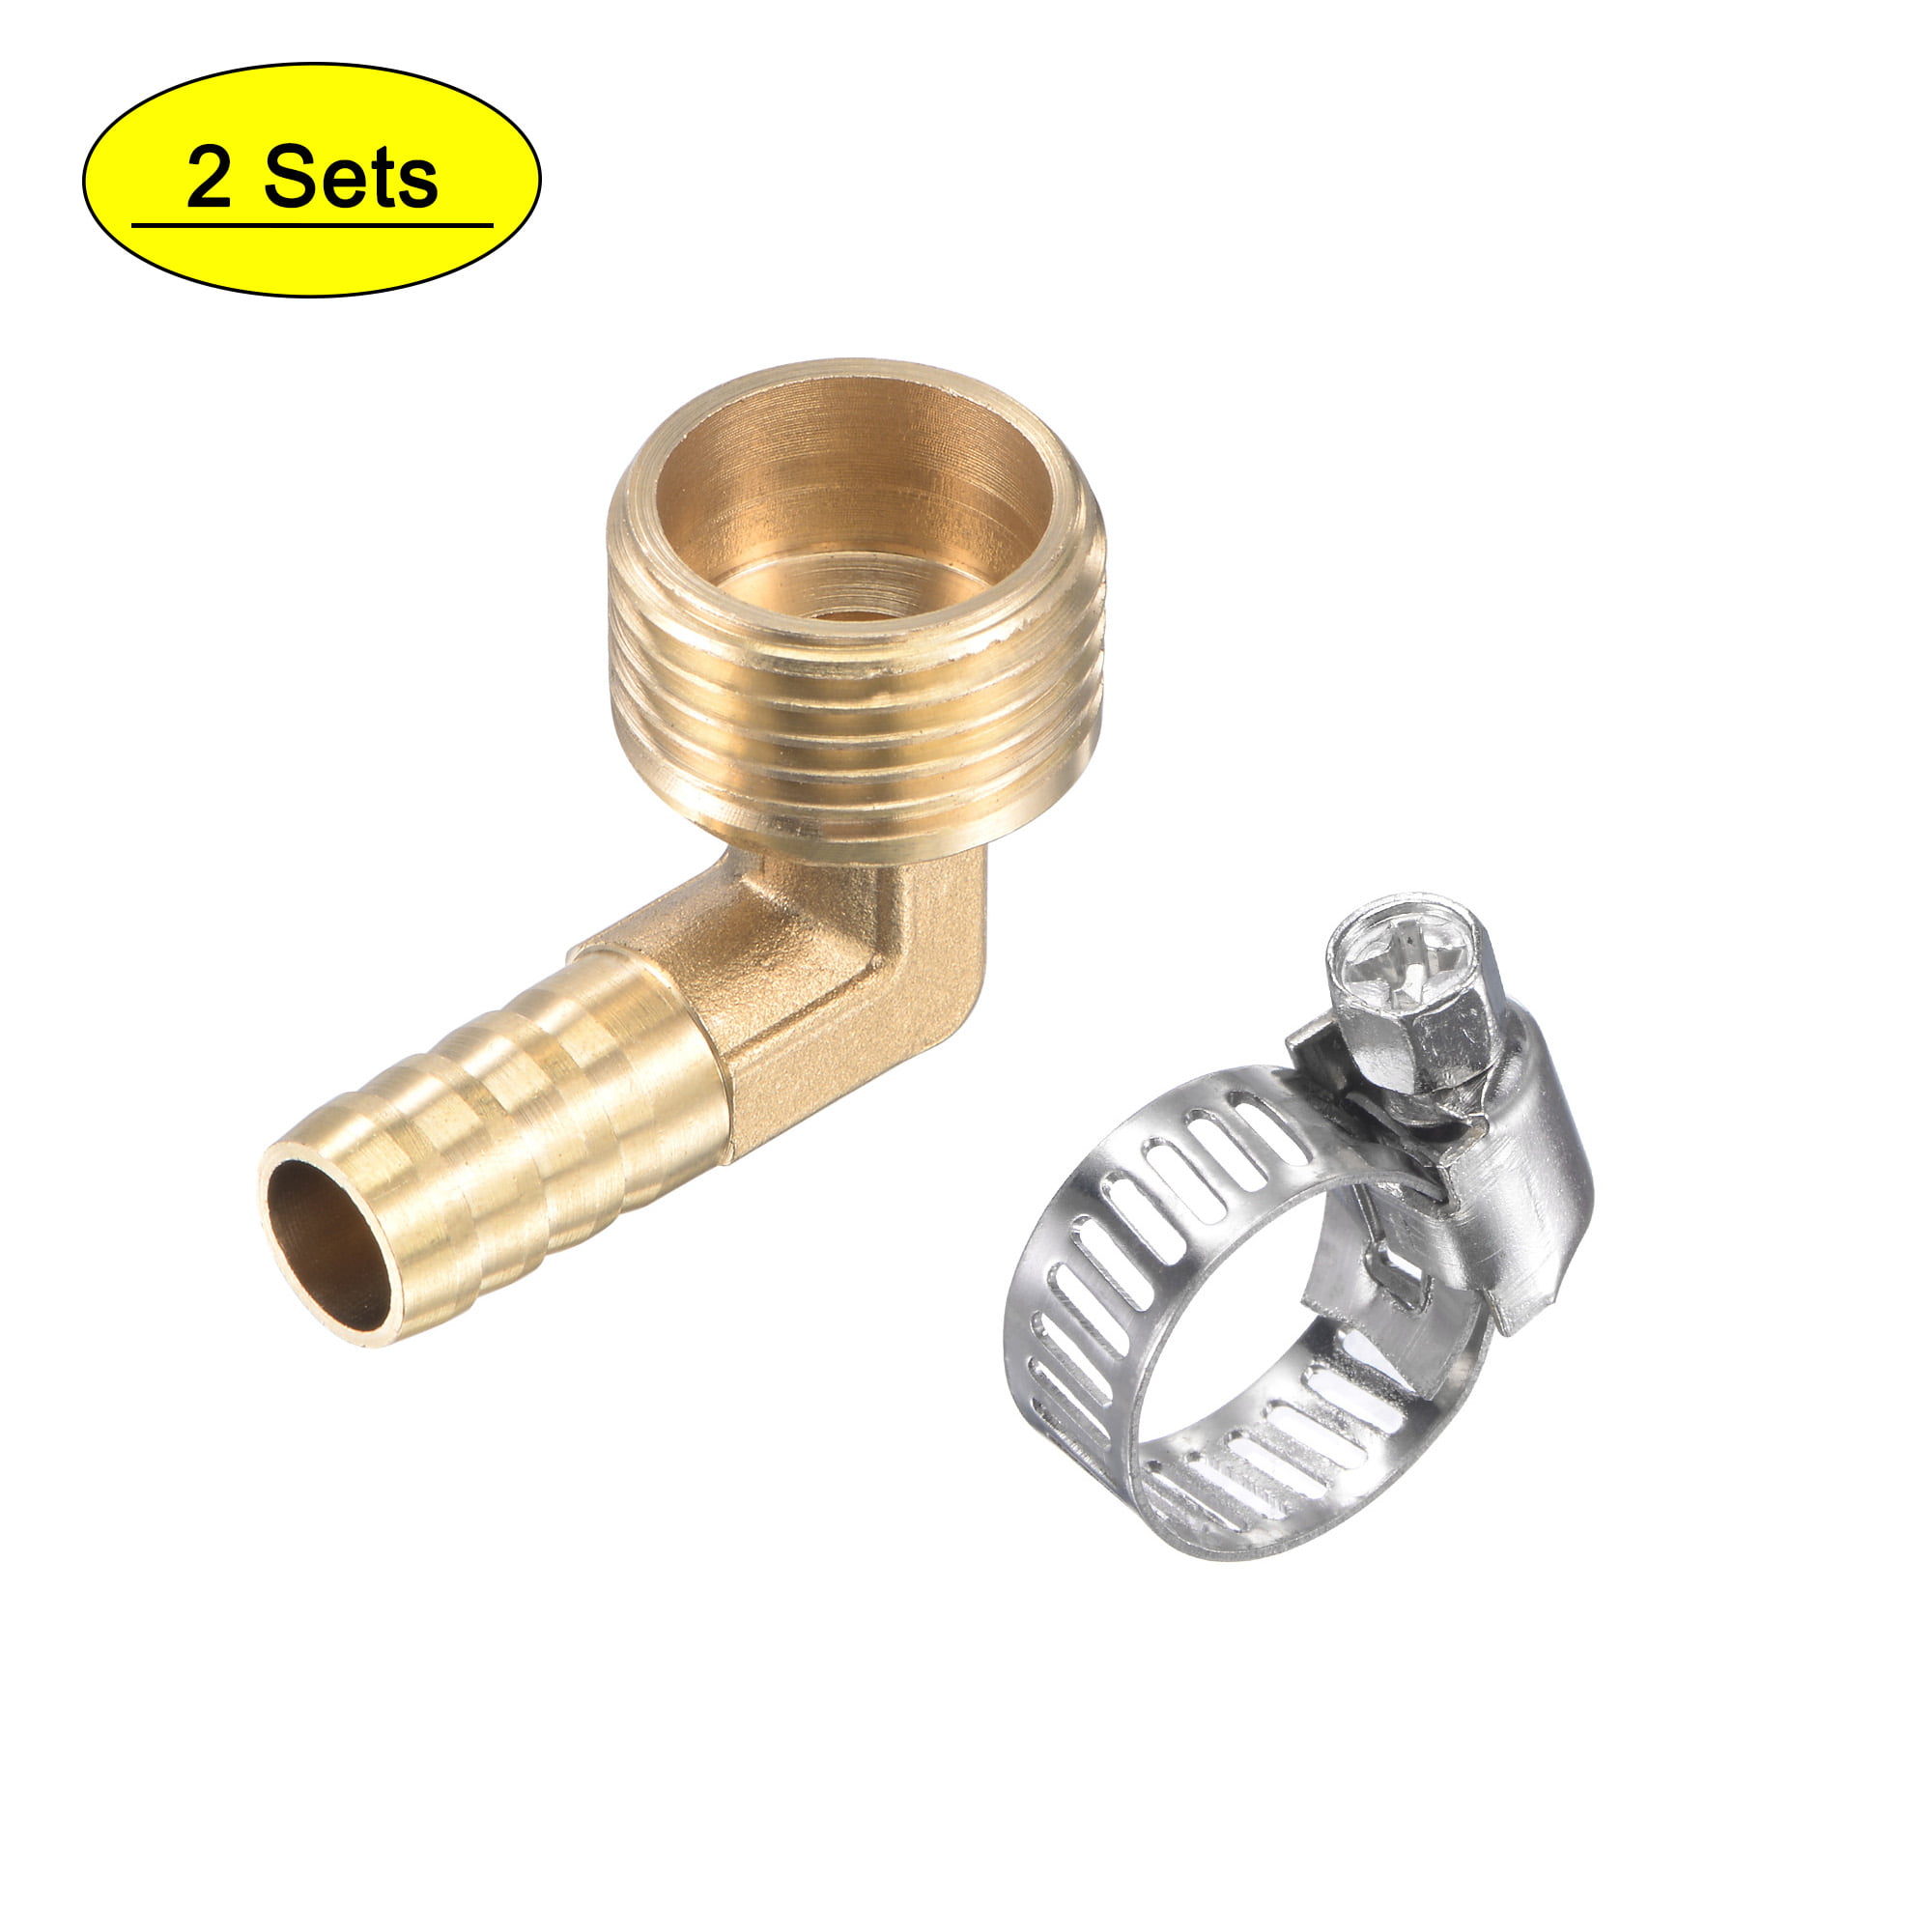 Details about   90°Elbow Brass Female Thread Fitting x Barb Hose Tail End Connector For Air Fuel 